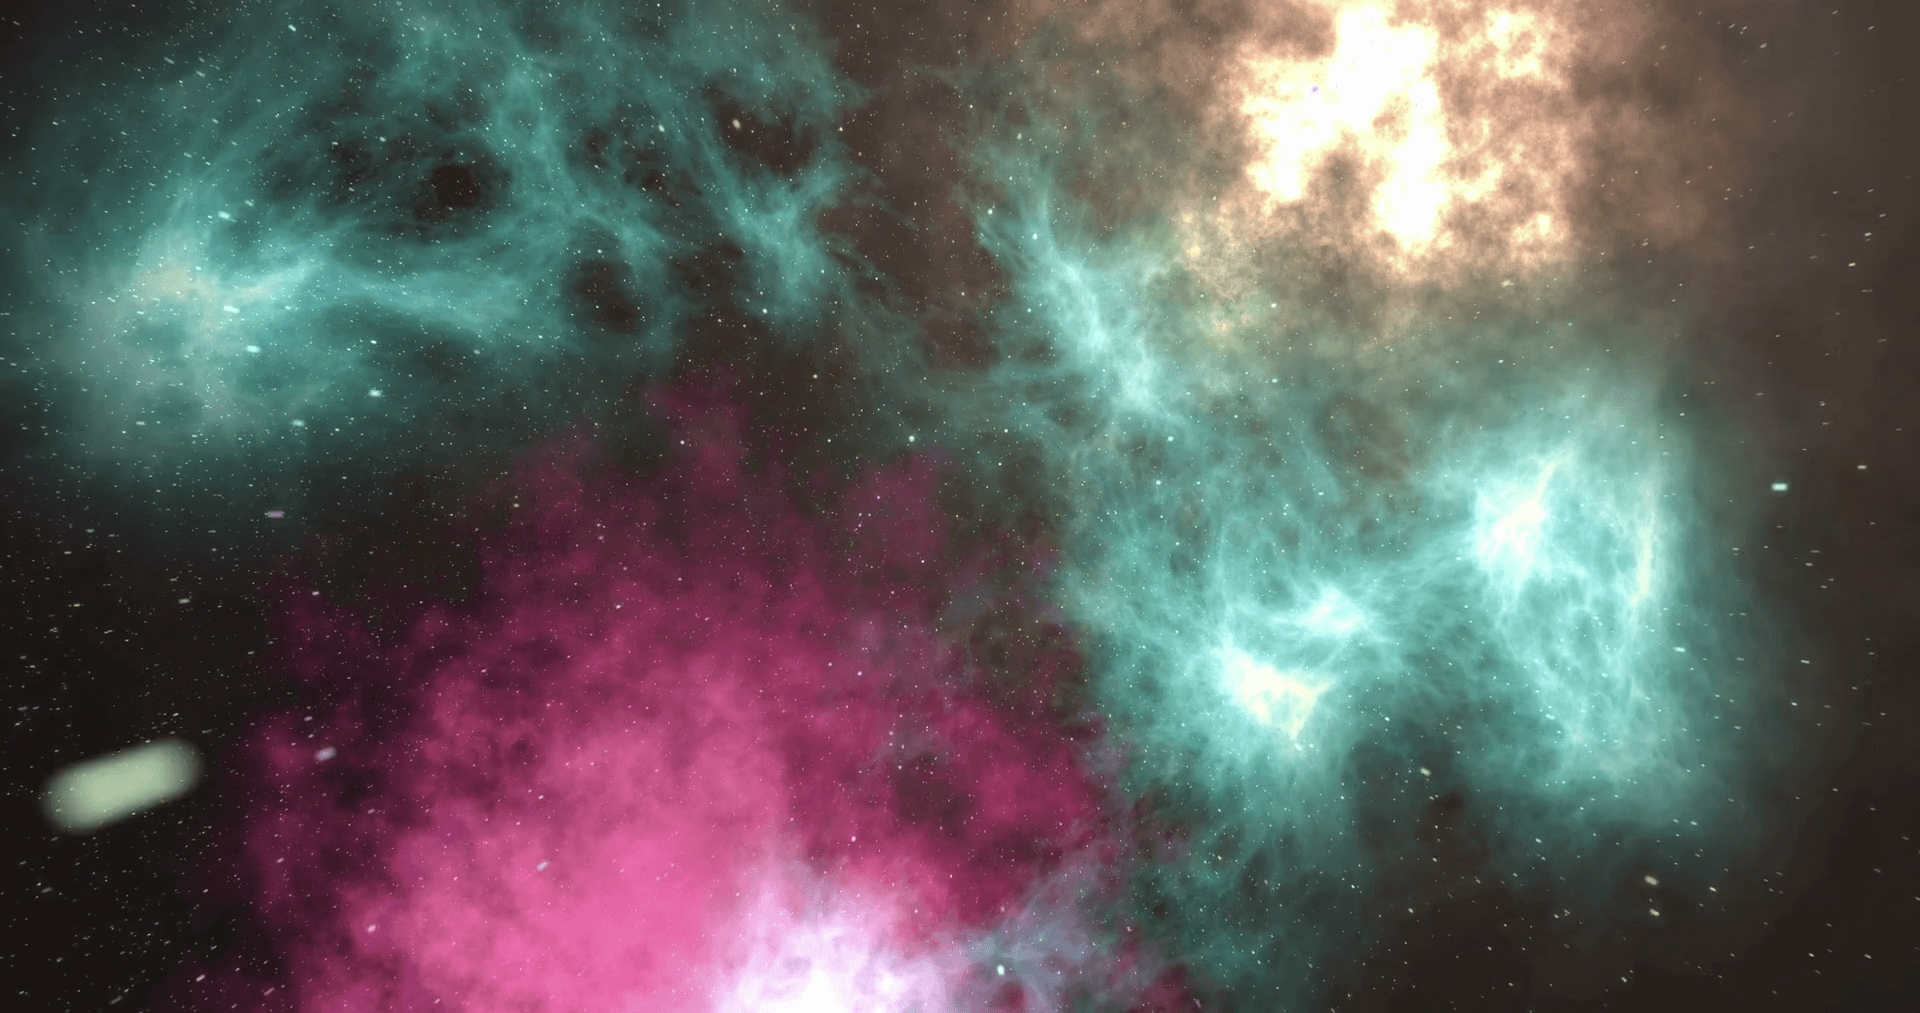 Starry outer space background with nebula. Colorful starry night sky